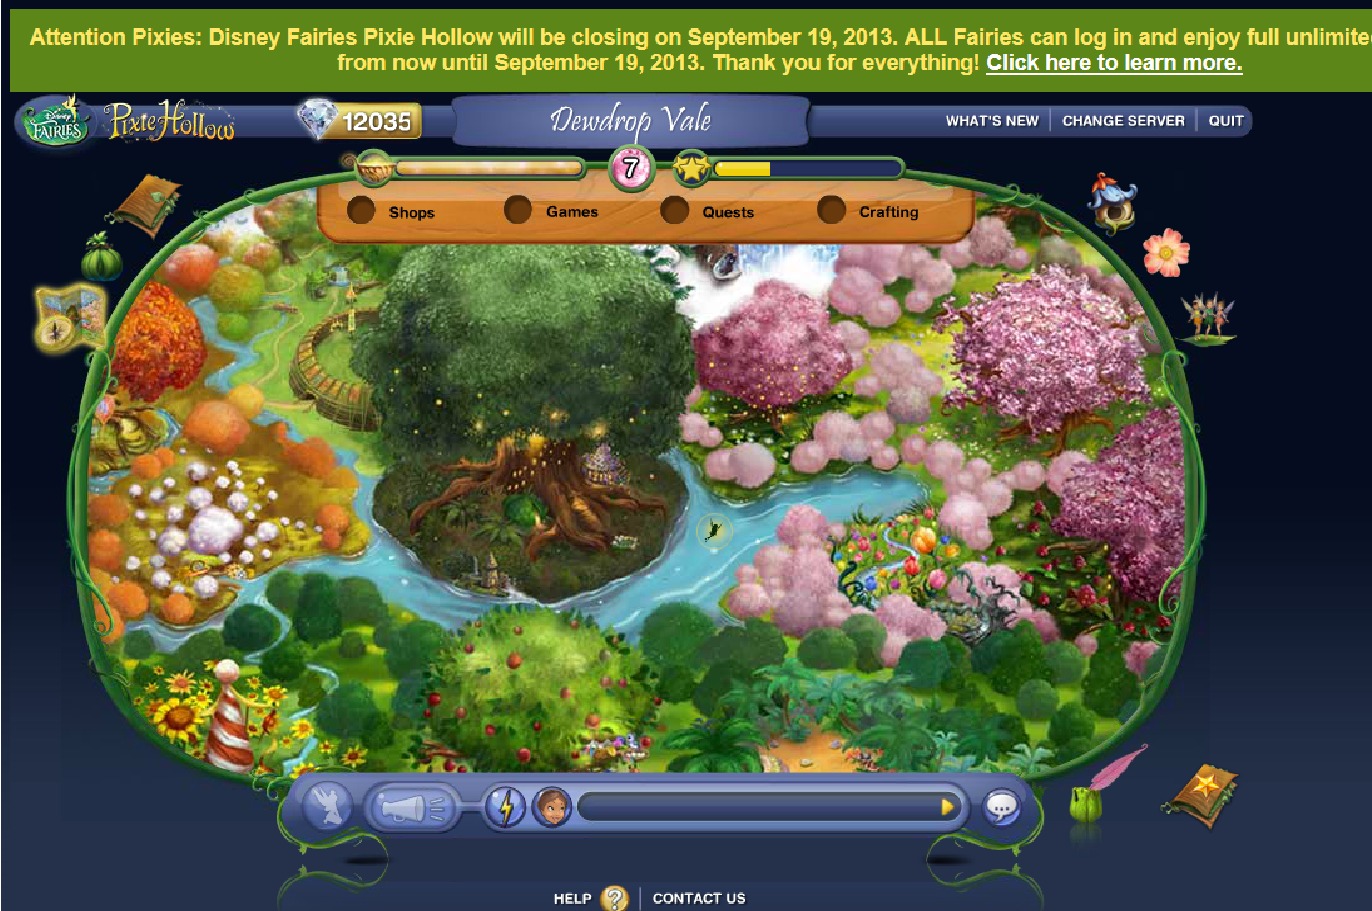 Pixie hollow online game